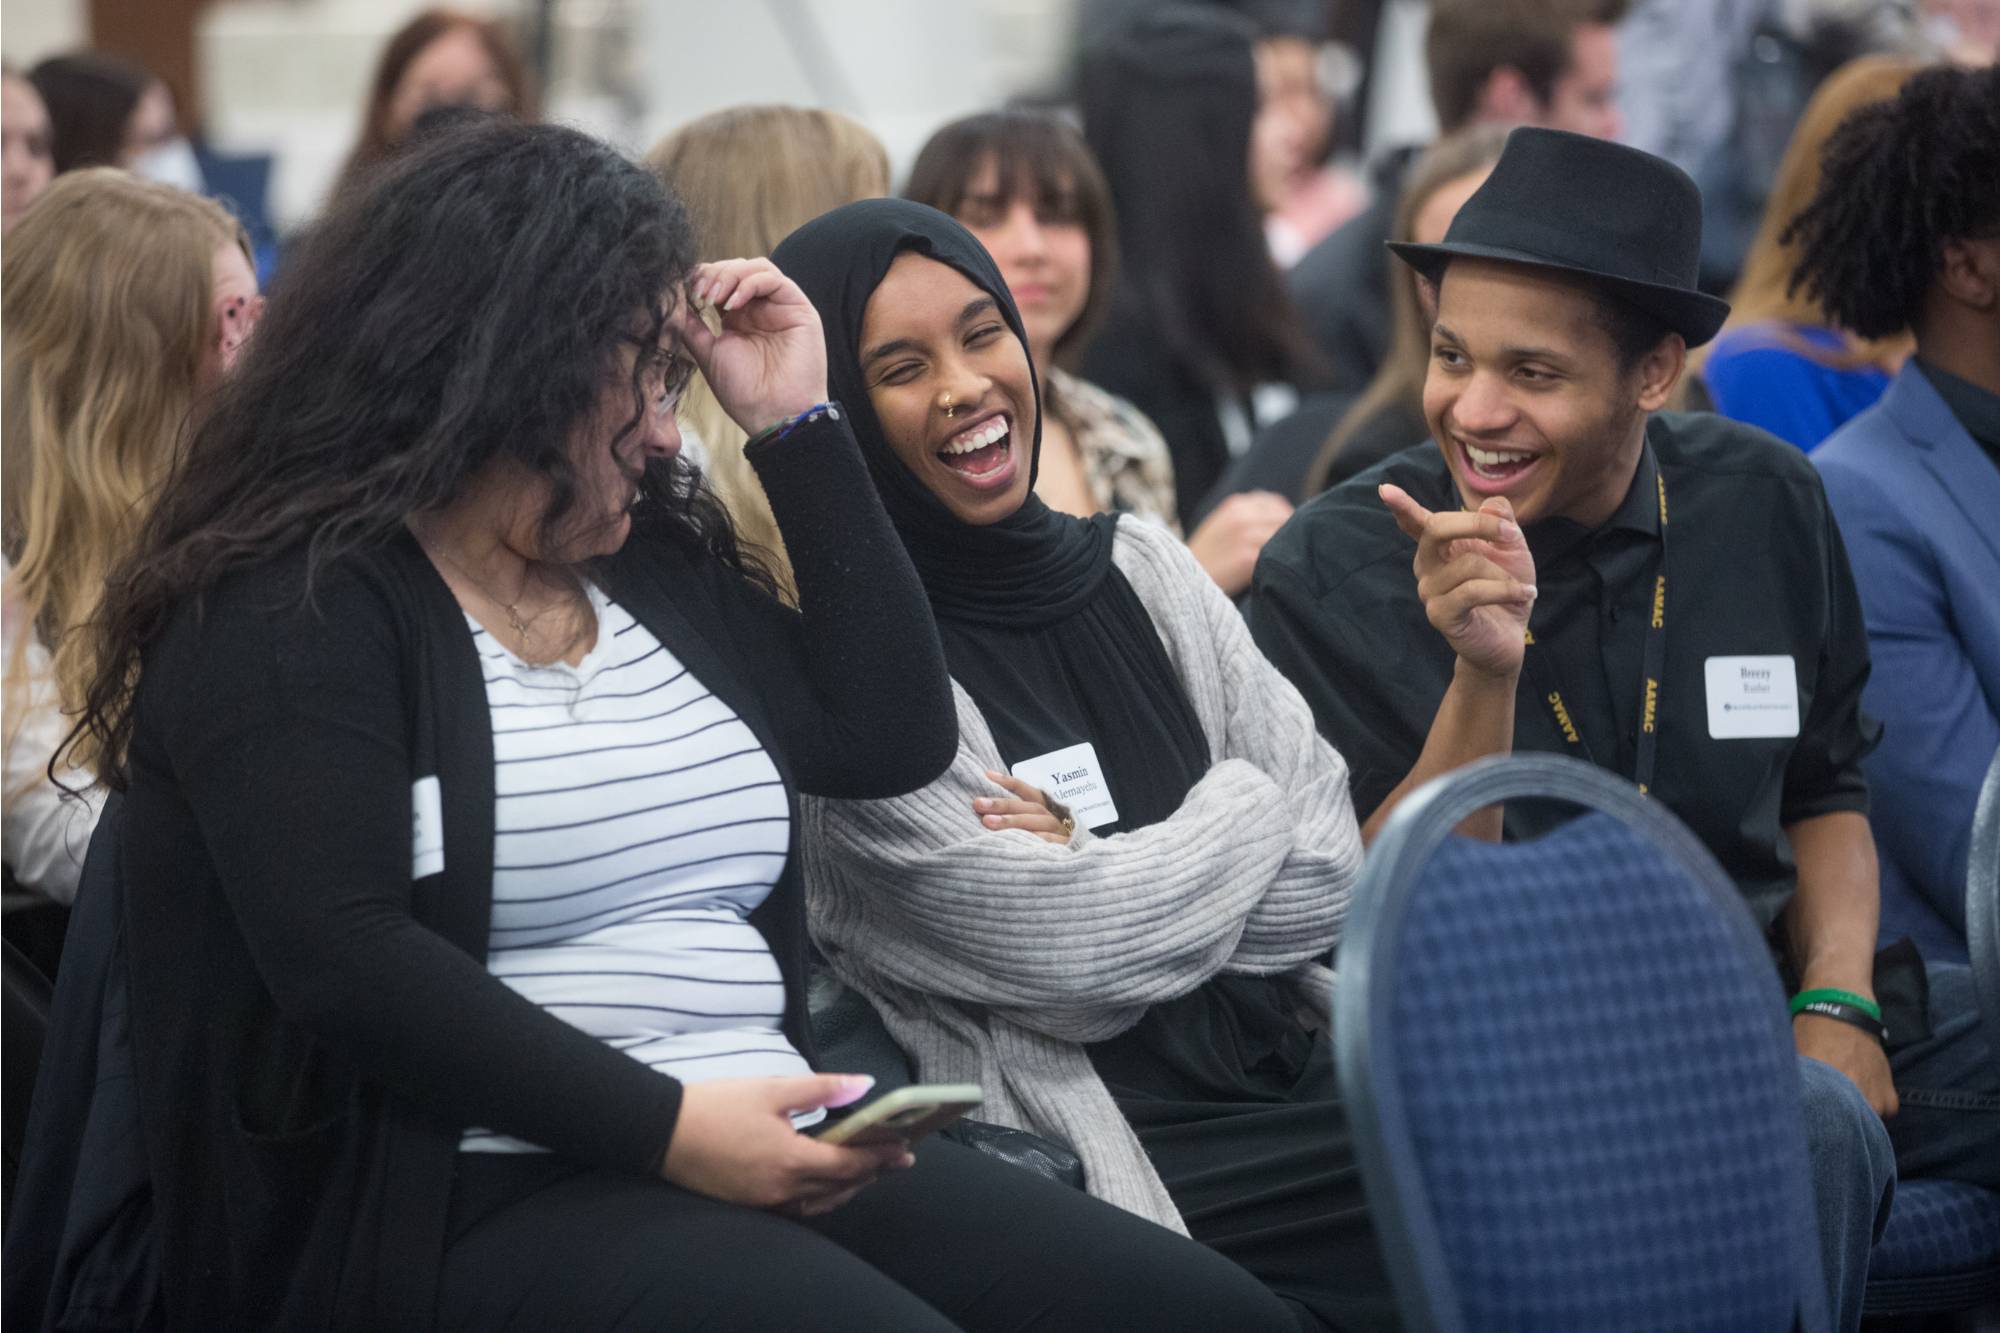 students laughing in audience at event